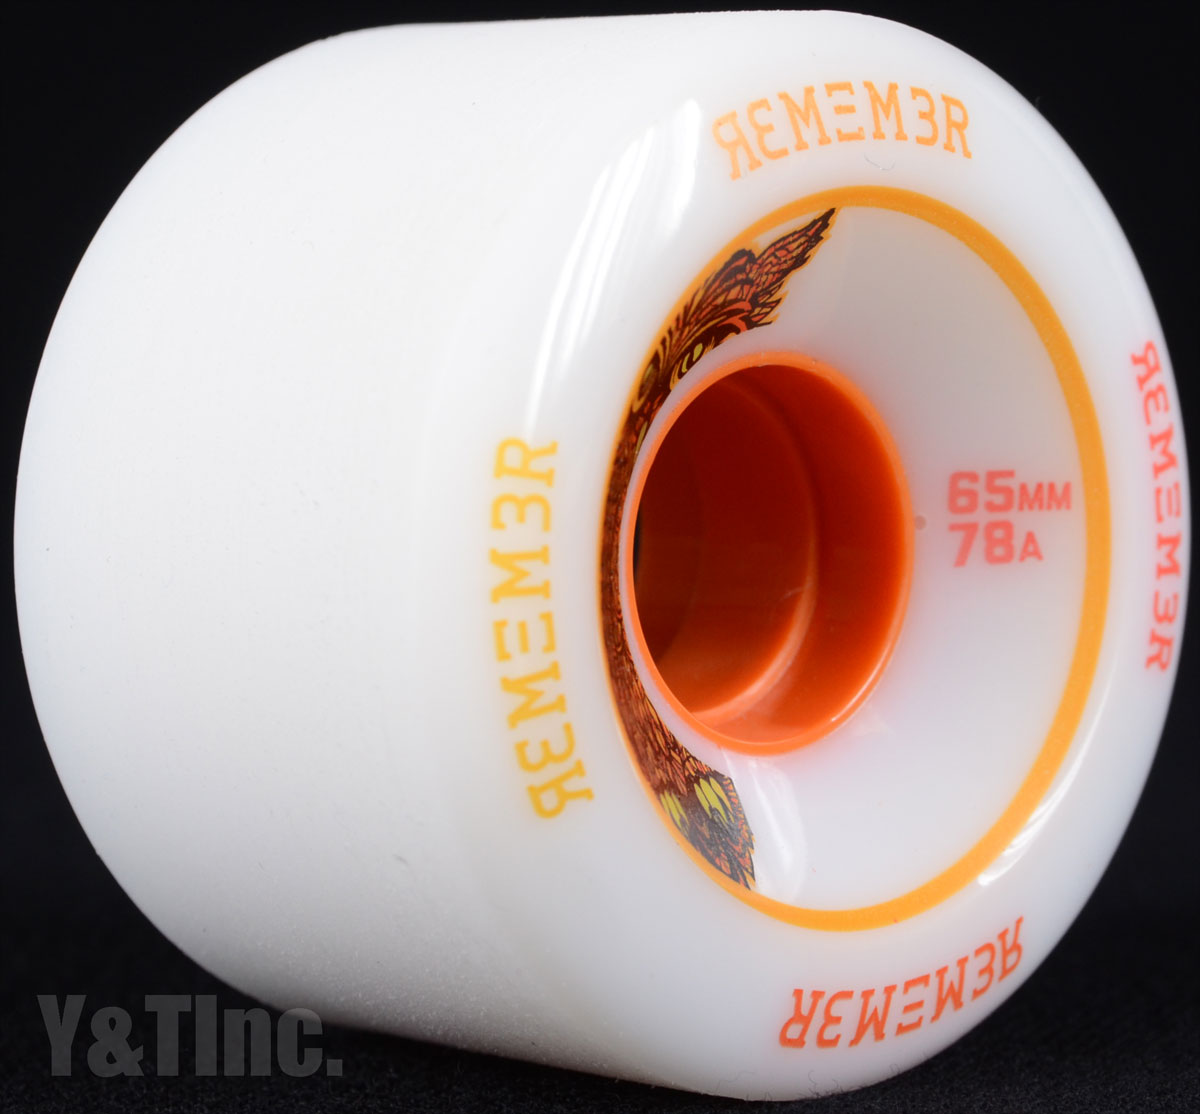 REMEMBER LiL Hoot 65mm 78a White_2